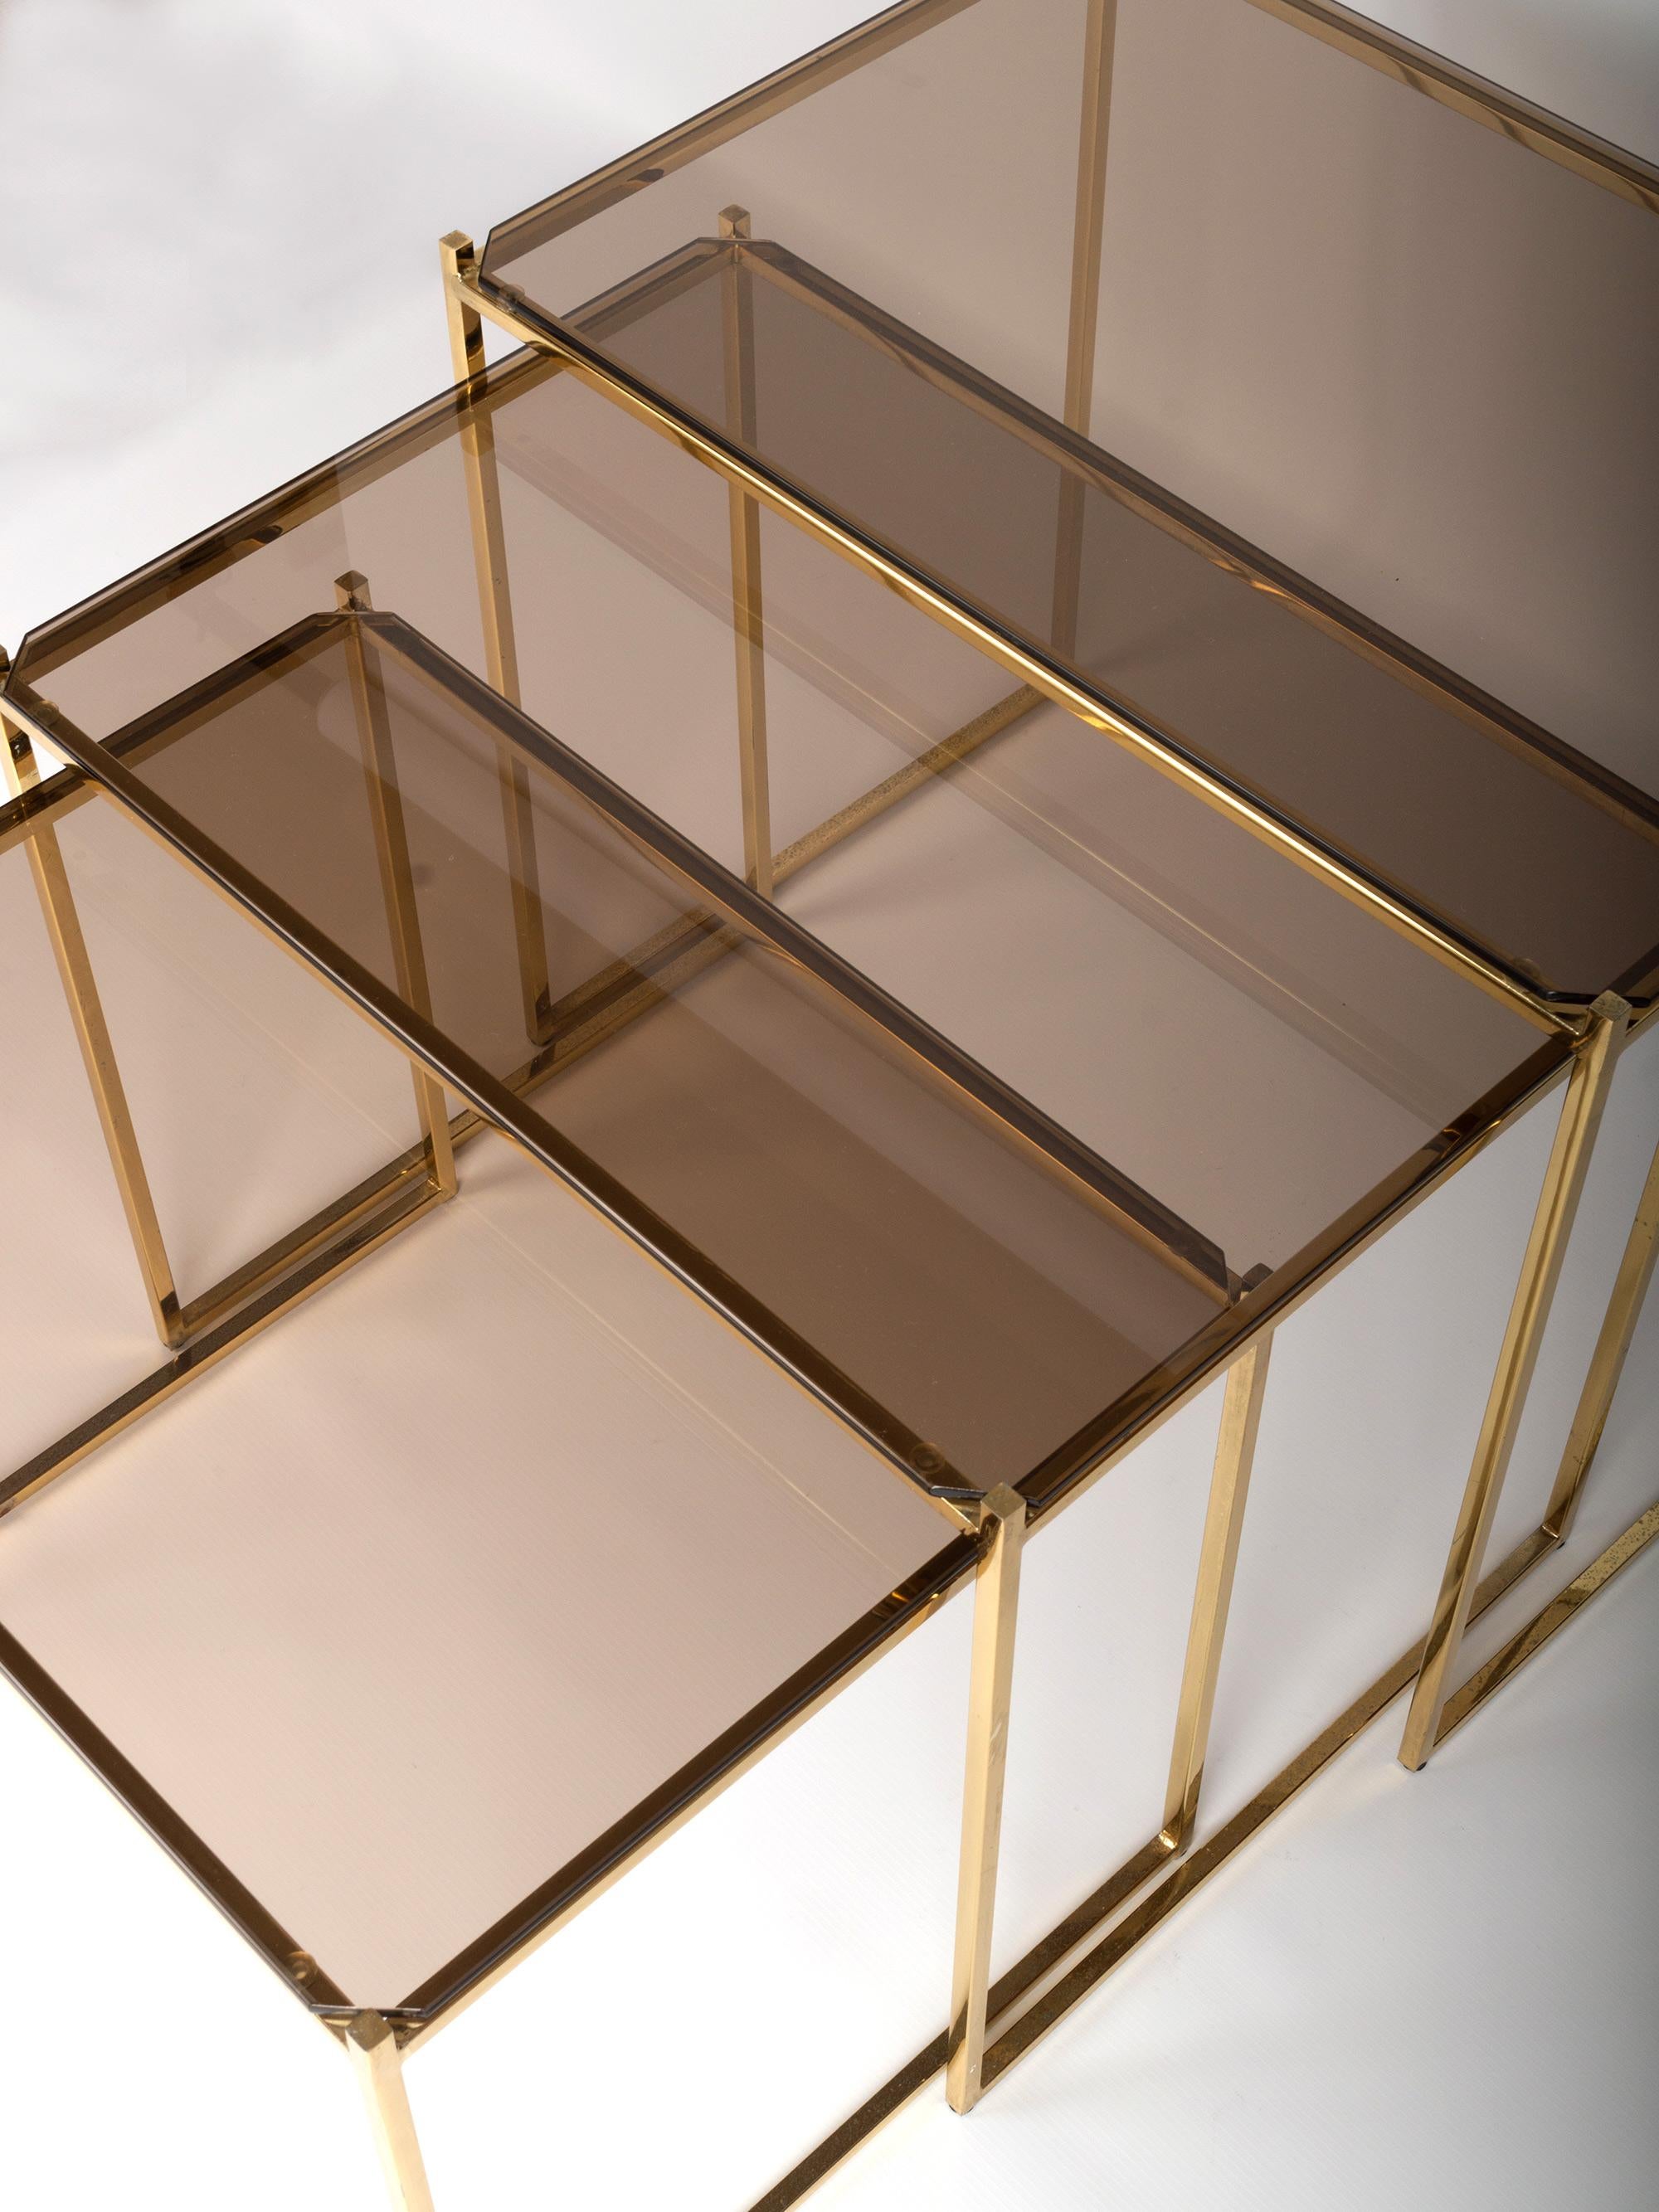 Mid-Century Modern gold-plated nesting side tables 
Attributed to Milo Baughman, USA, circa 1970.
Gold-plated gilded metal nest of three tables, inset with smoked glass.
Very good vintage condition commensurate of age.

Dimensions:
H 46 x W 55